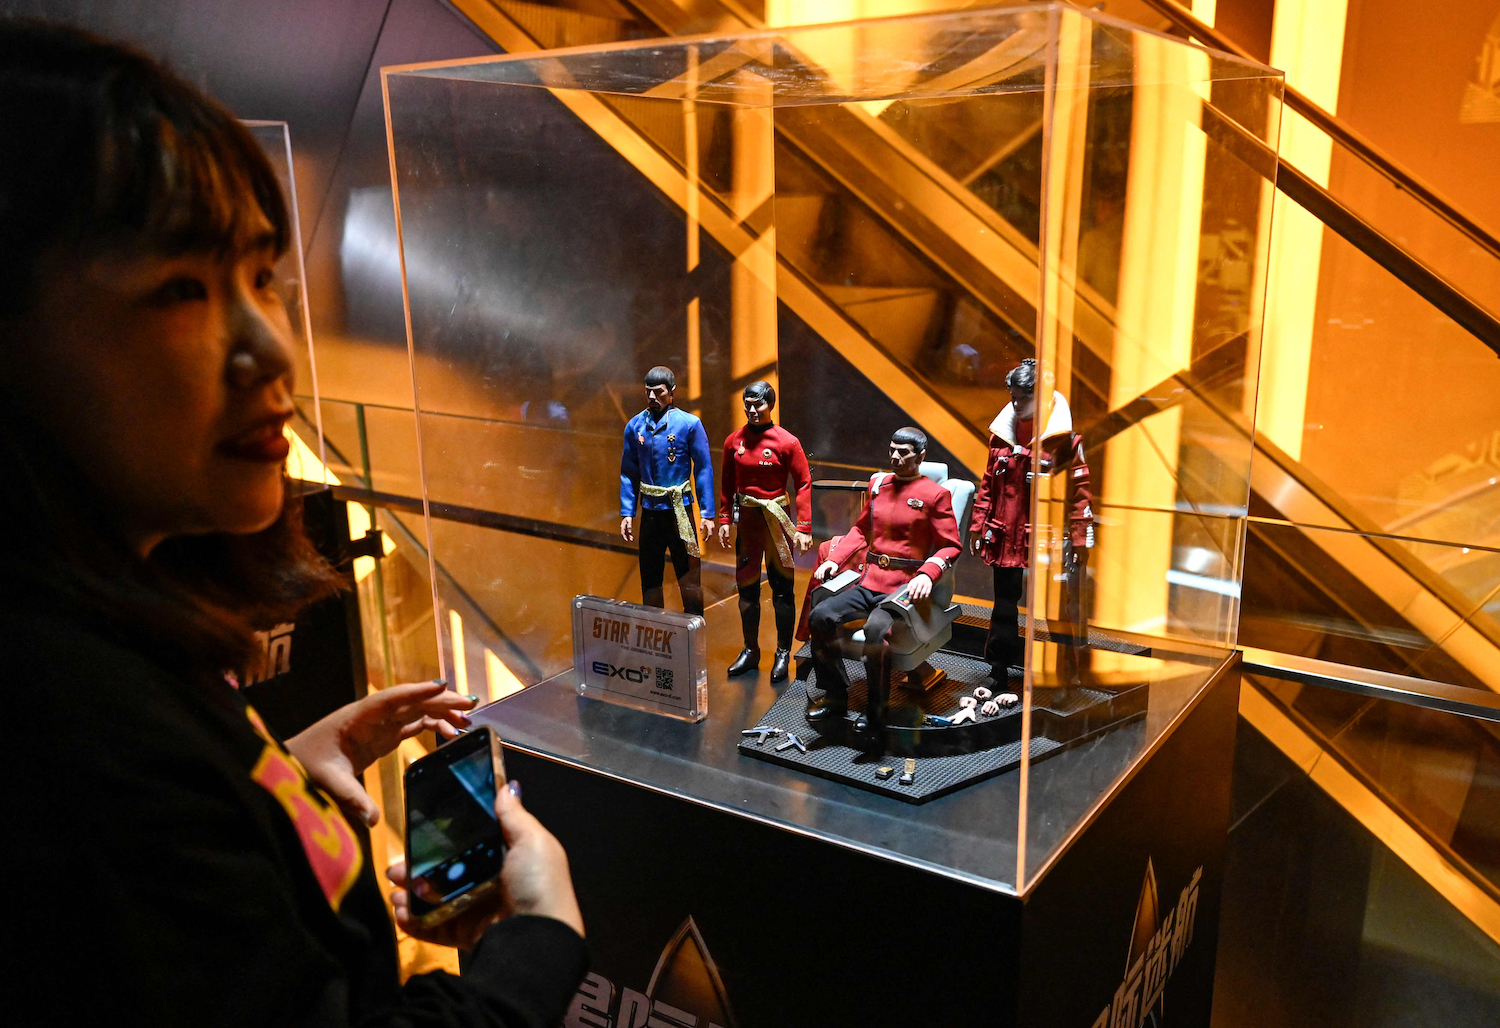 On Saturday, fans of the space adventure franchise "Star Trek" gathered in Beijing for the first official event of its type in mainland China.